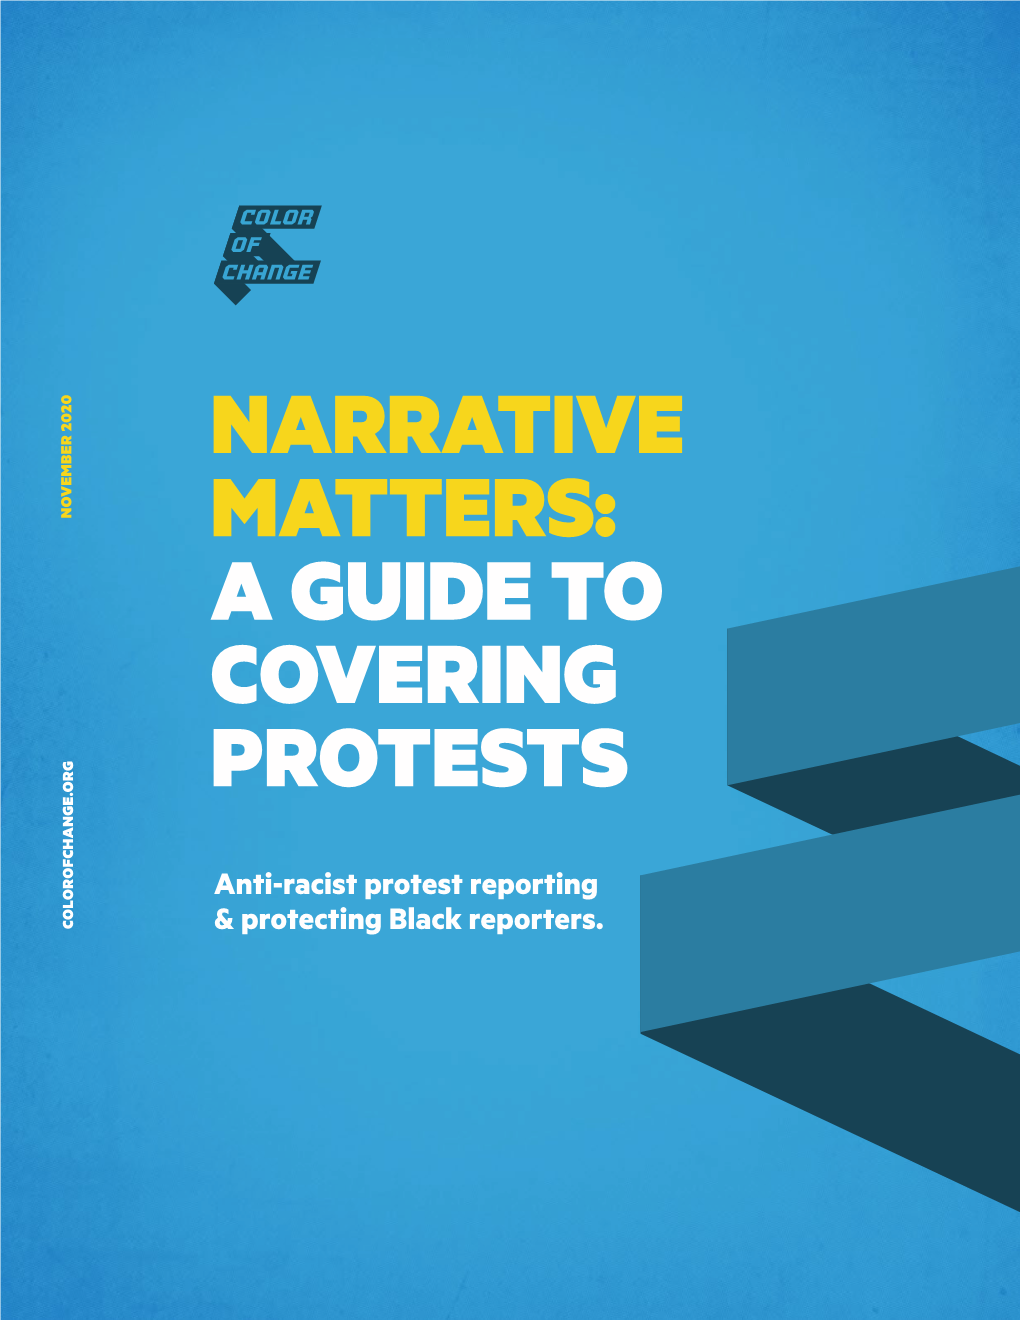 A Guide to Covering Protests